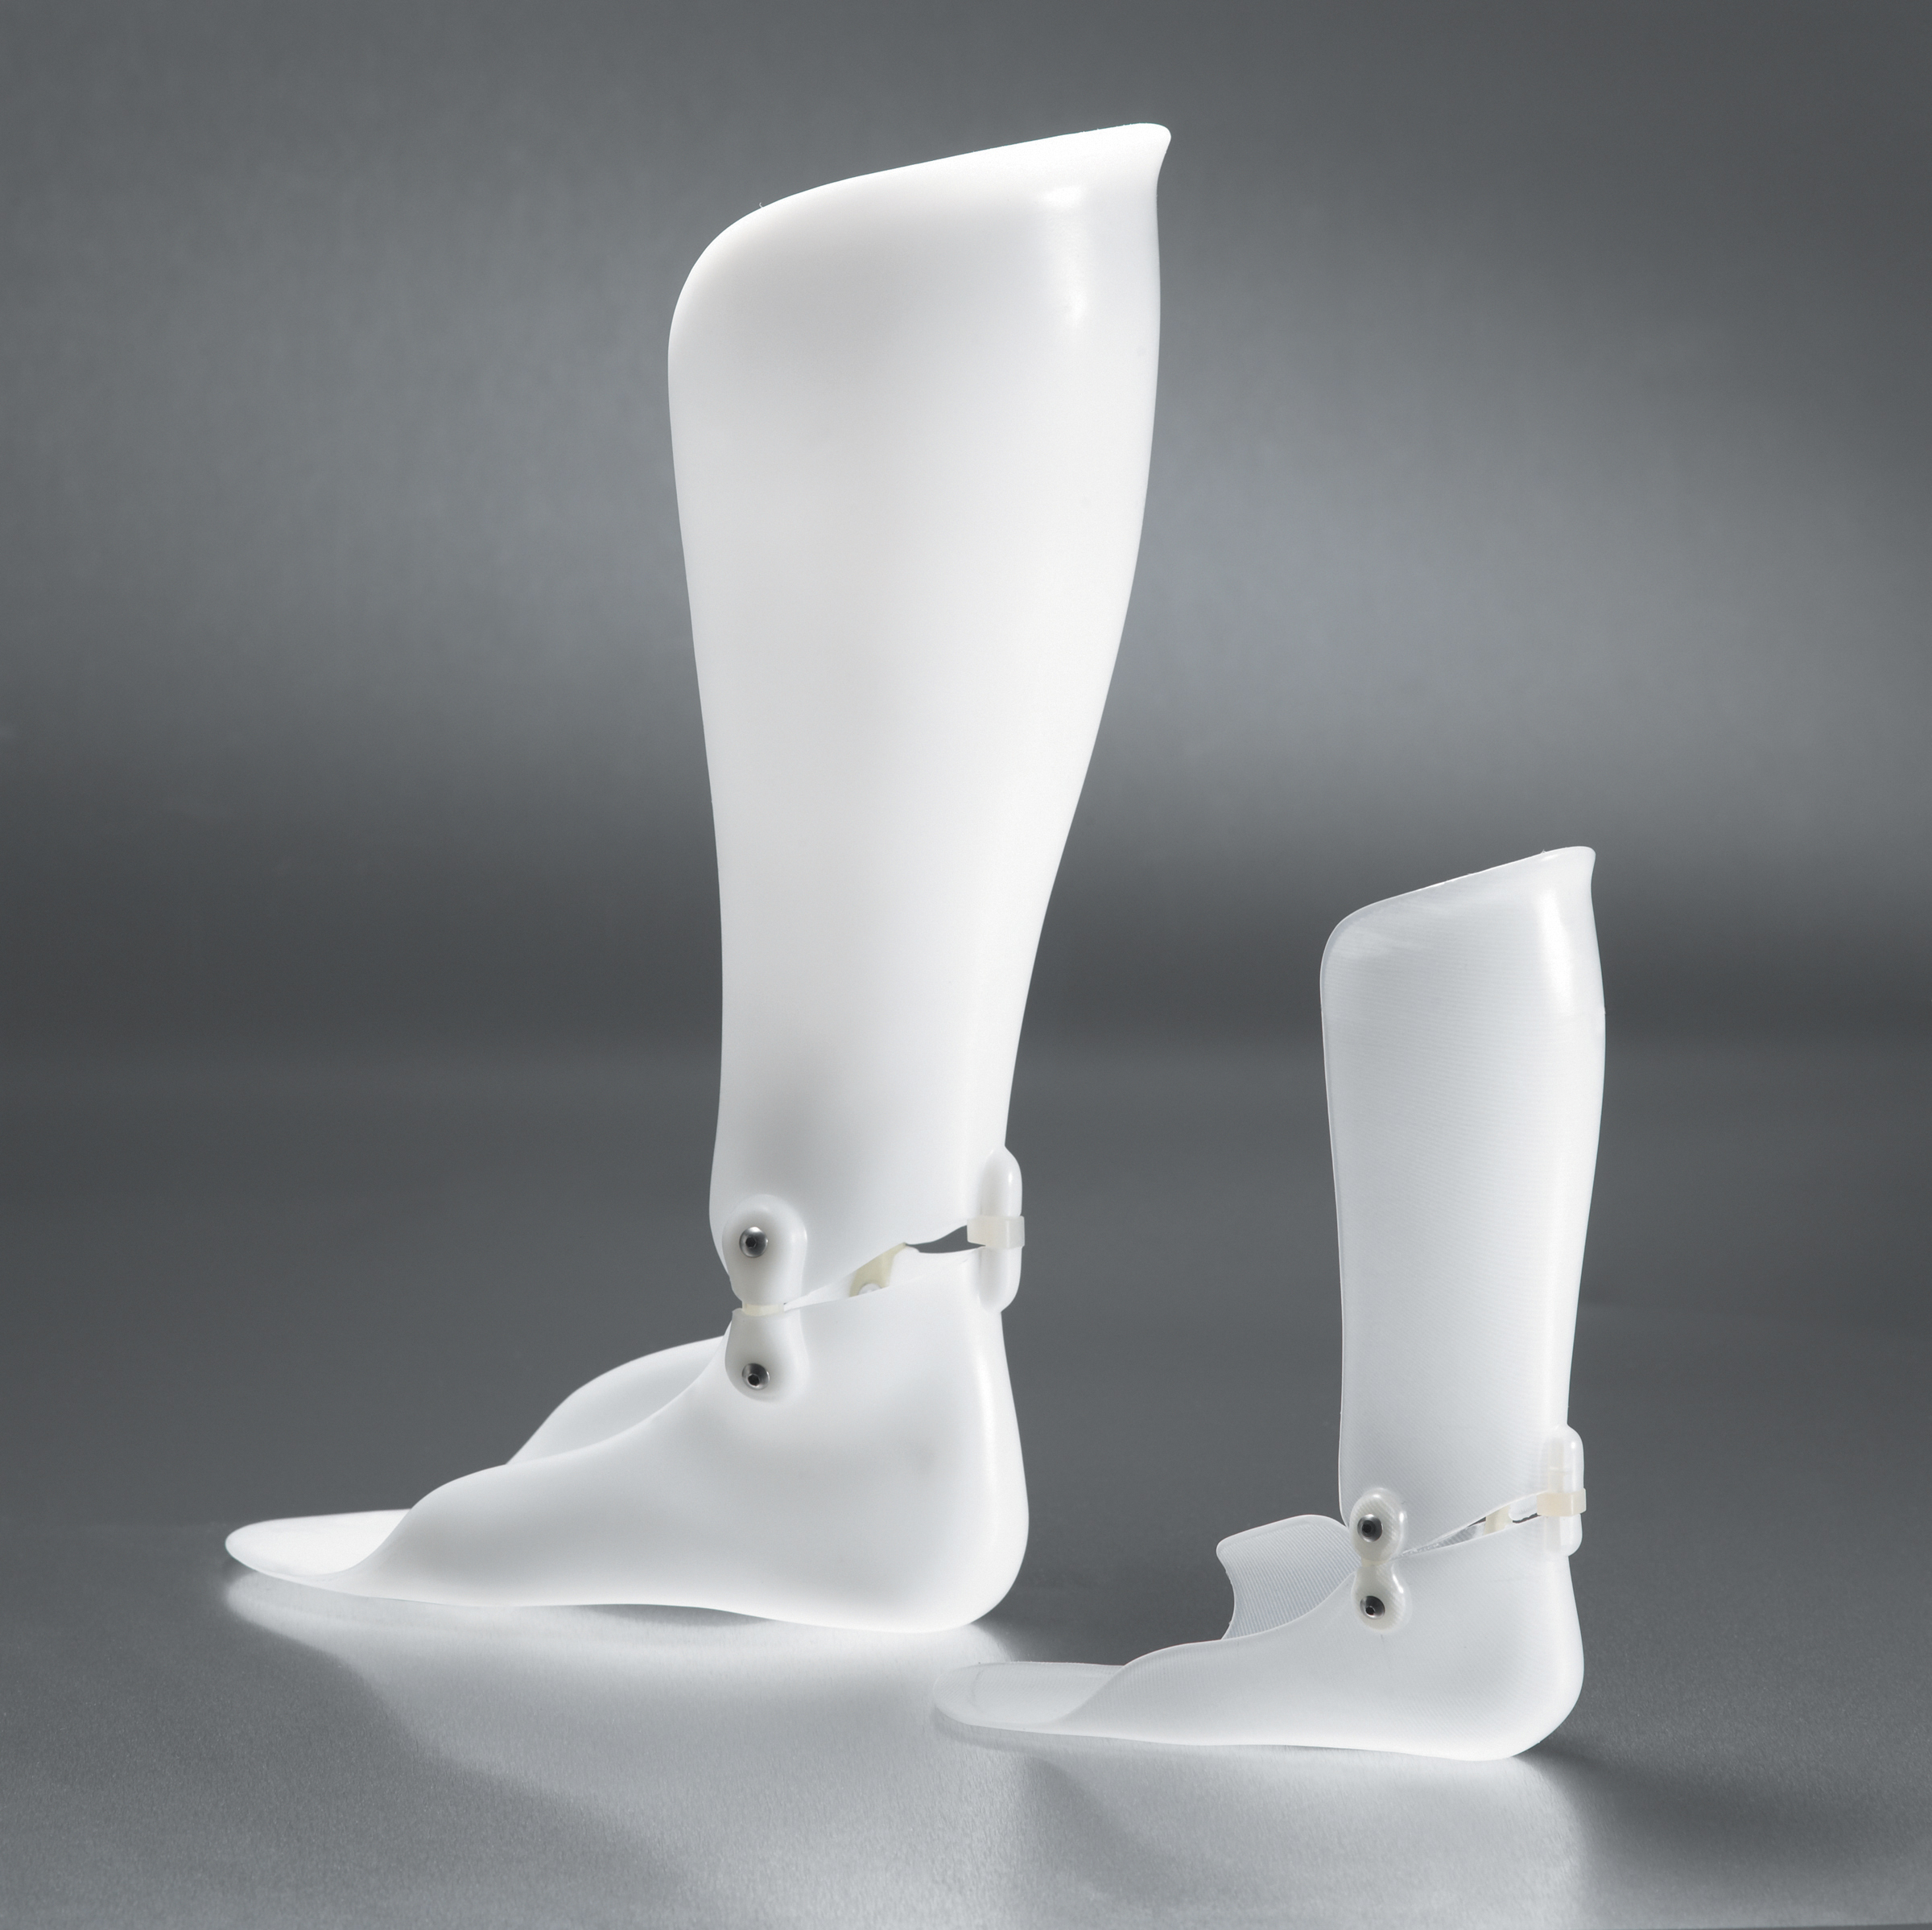 Afo S Ankle Foot Orthoses Medical Shoes Orthotics And Prosthetics ...